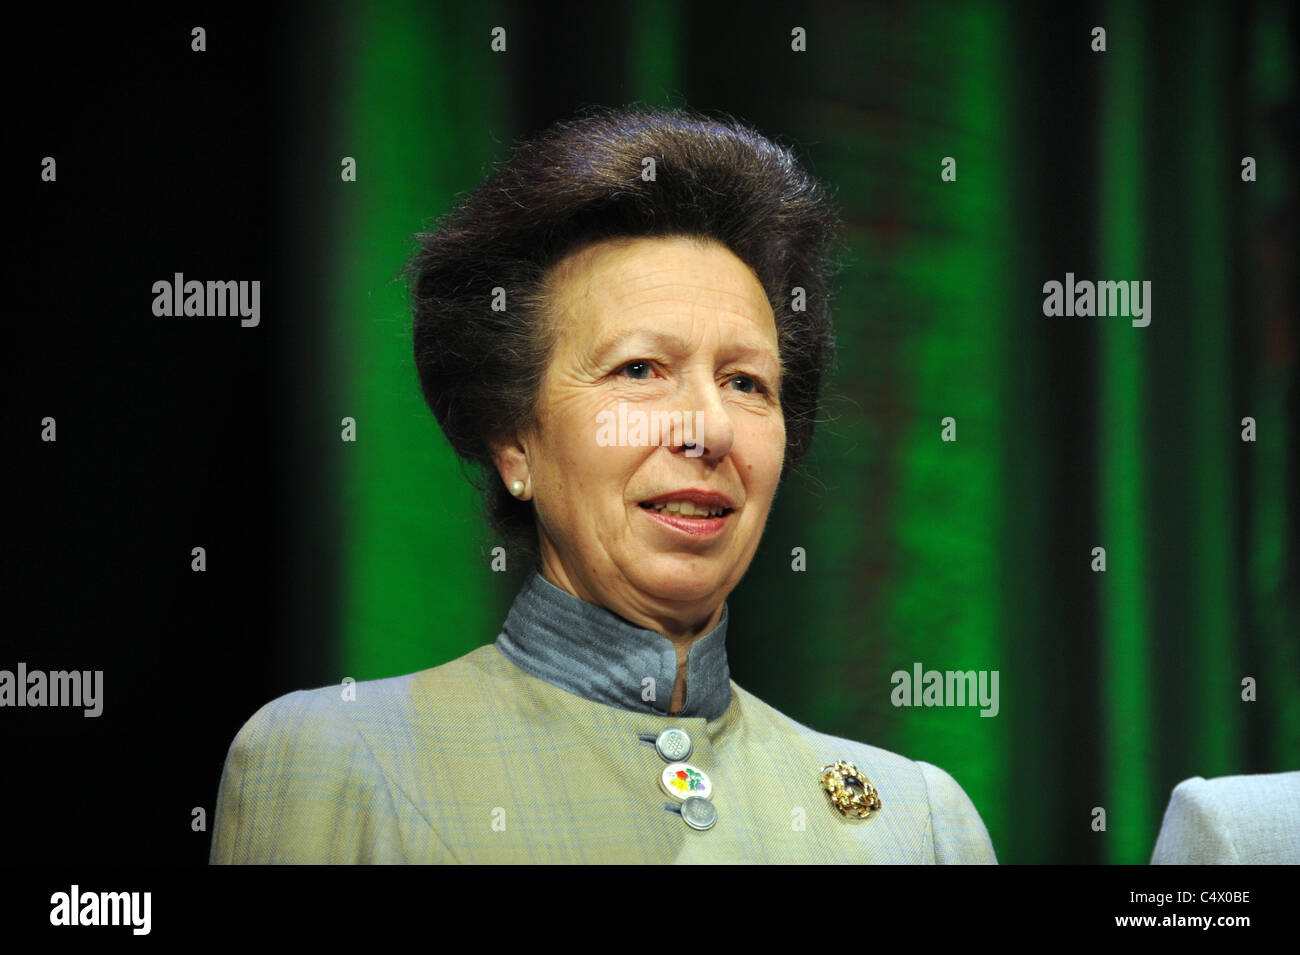 Her Royal Highness, The Princess Royal speaking at the Townswomen's Guild Annual Conference in Birmingham 24/6/11 Stock Photo